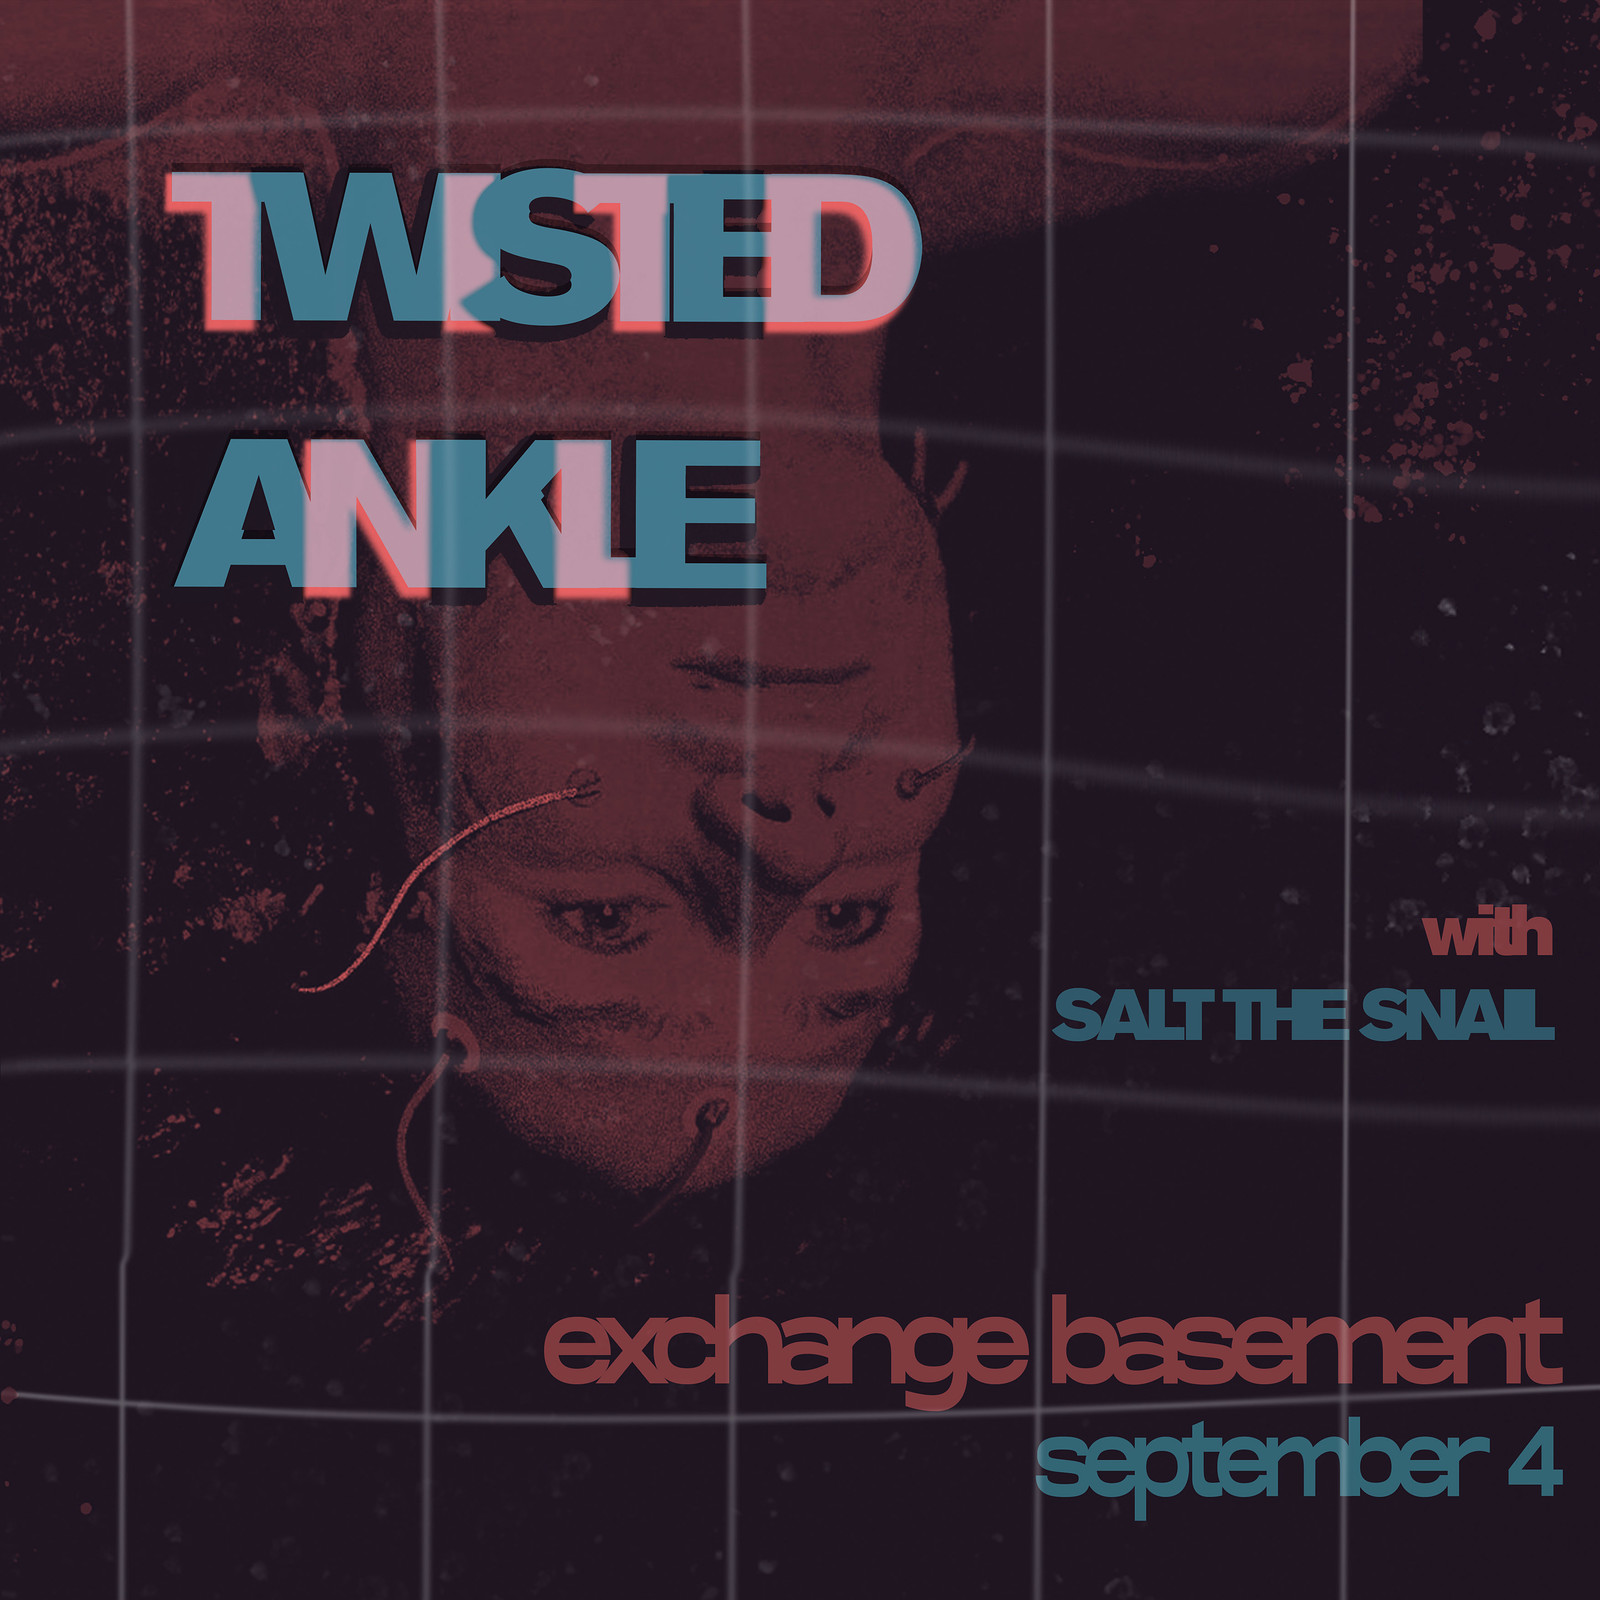 Twisted Ankle at Exchange